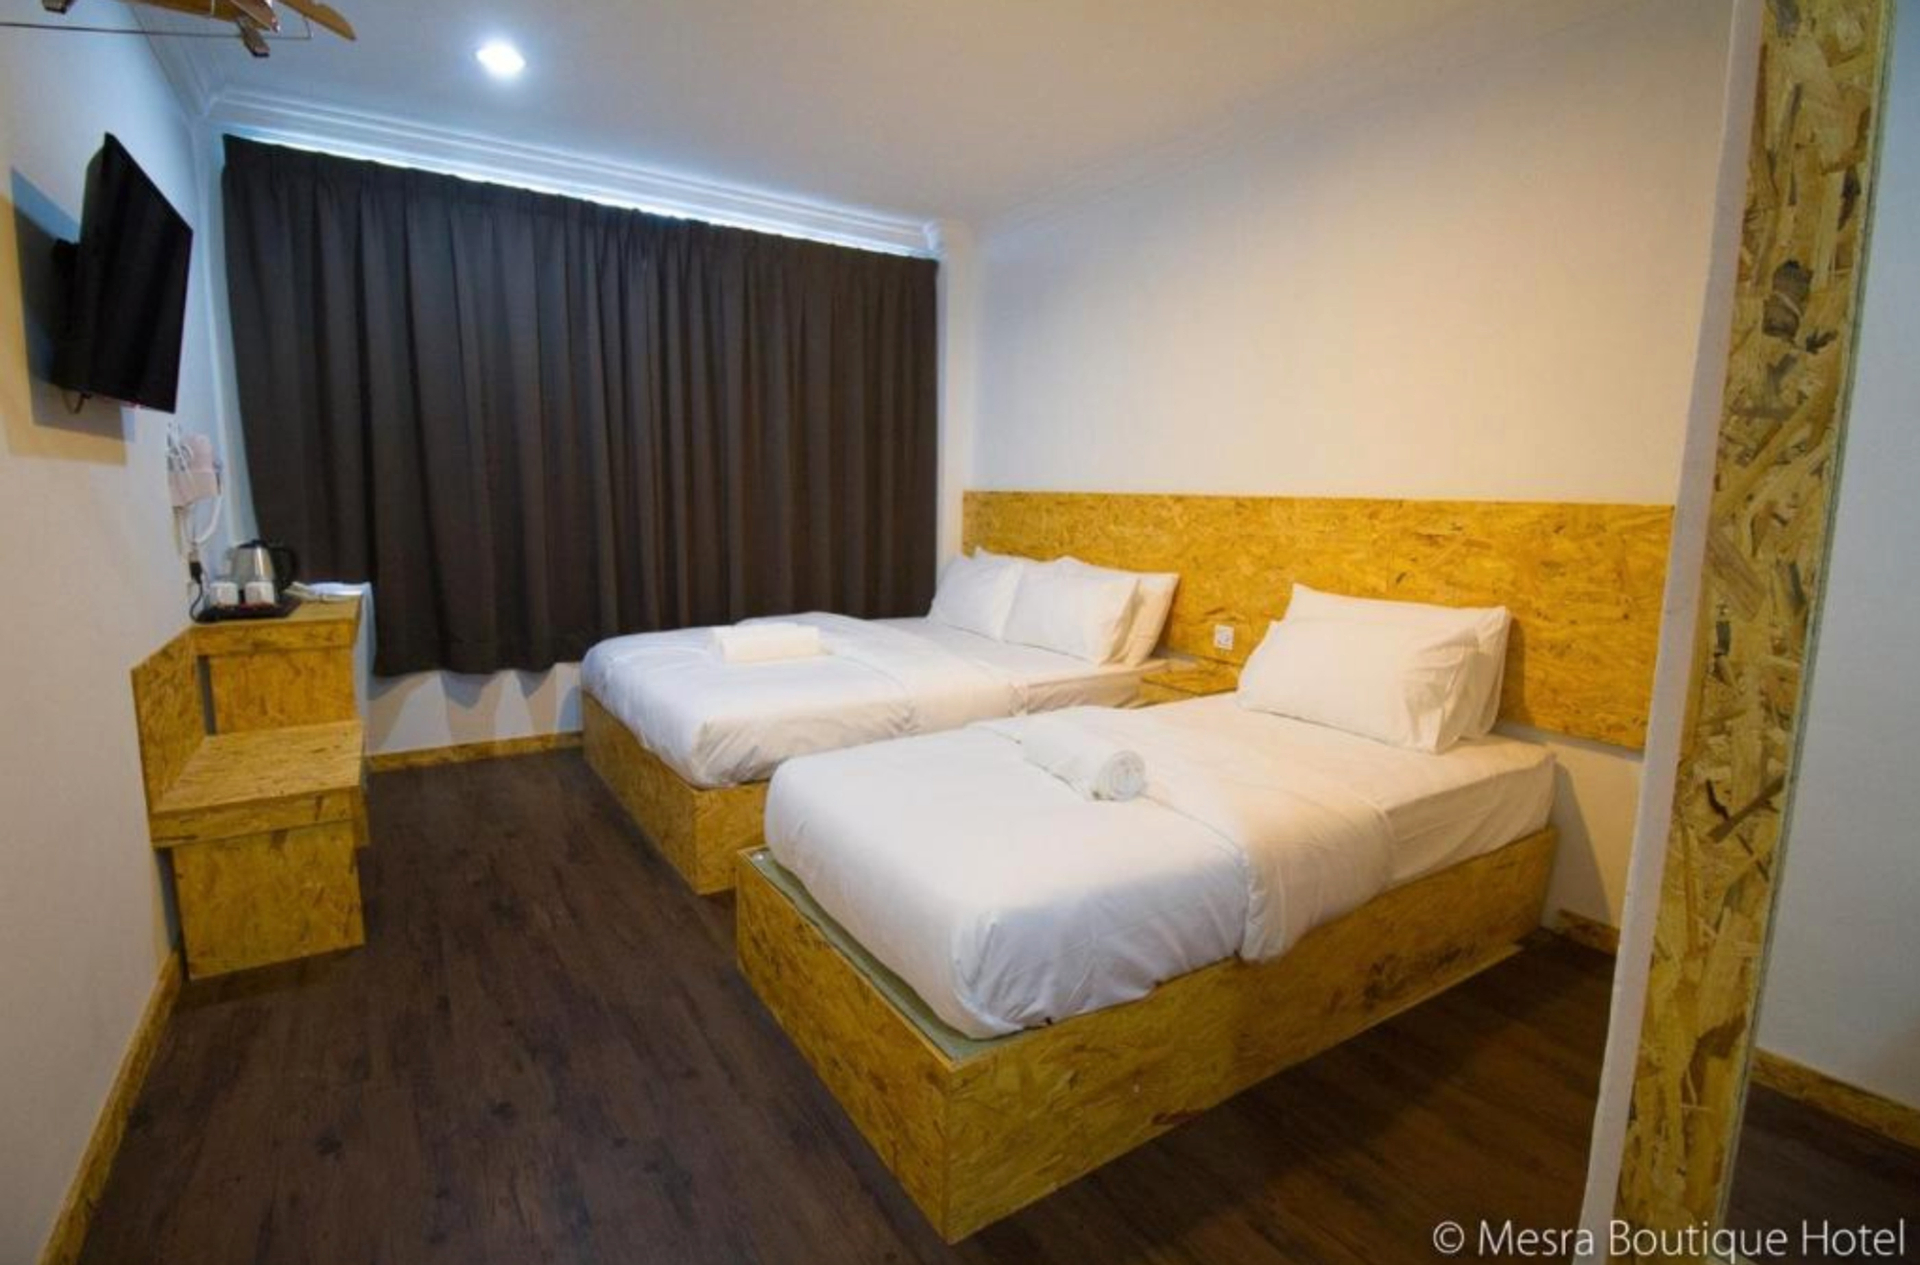 Double Deluxe Room or Other Beds